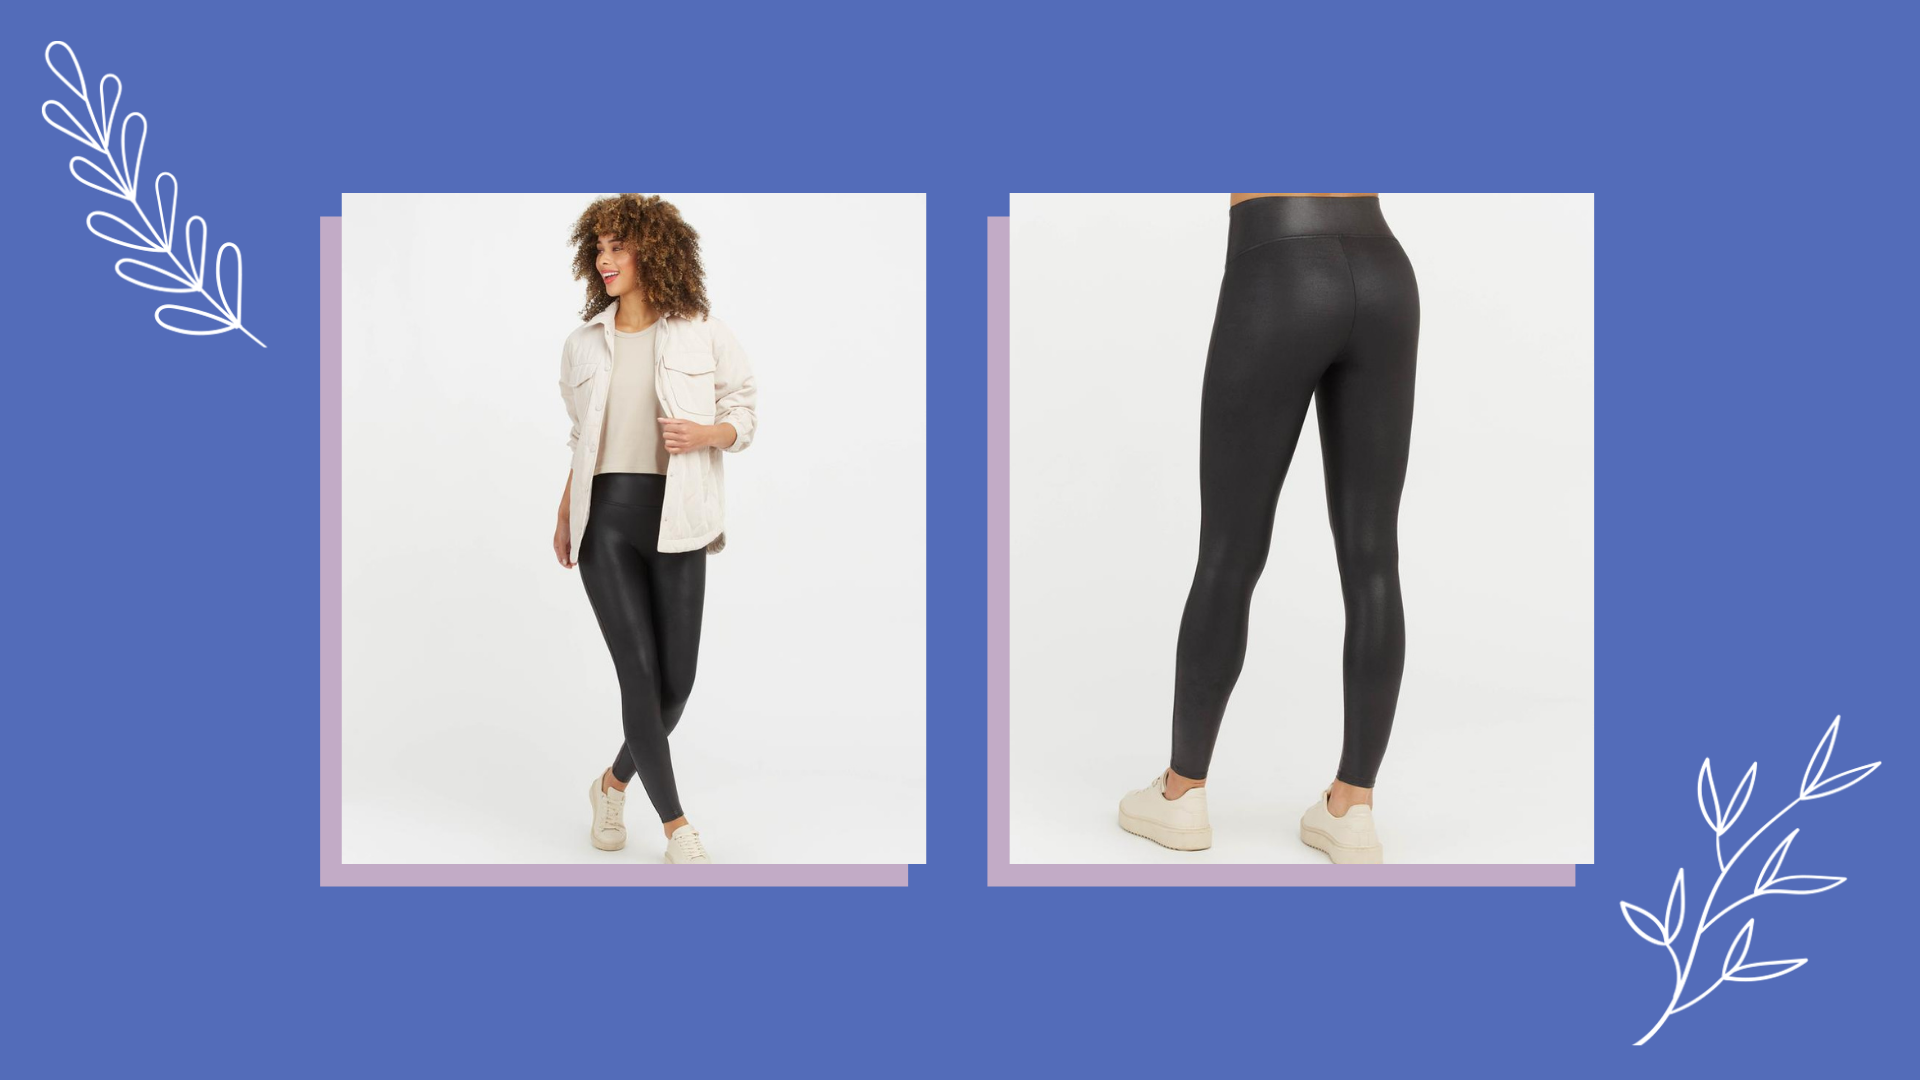 Spanx Faux Leather Leggings review: Are they worth the price?